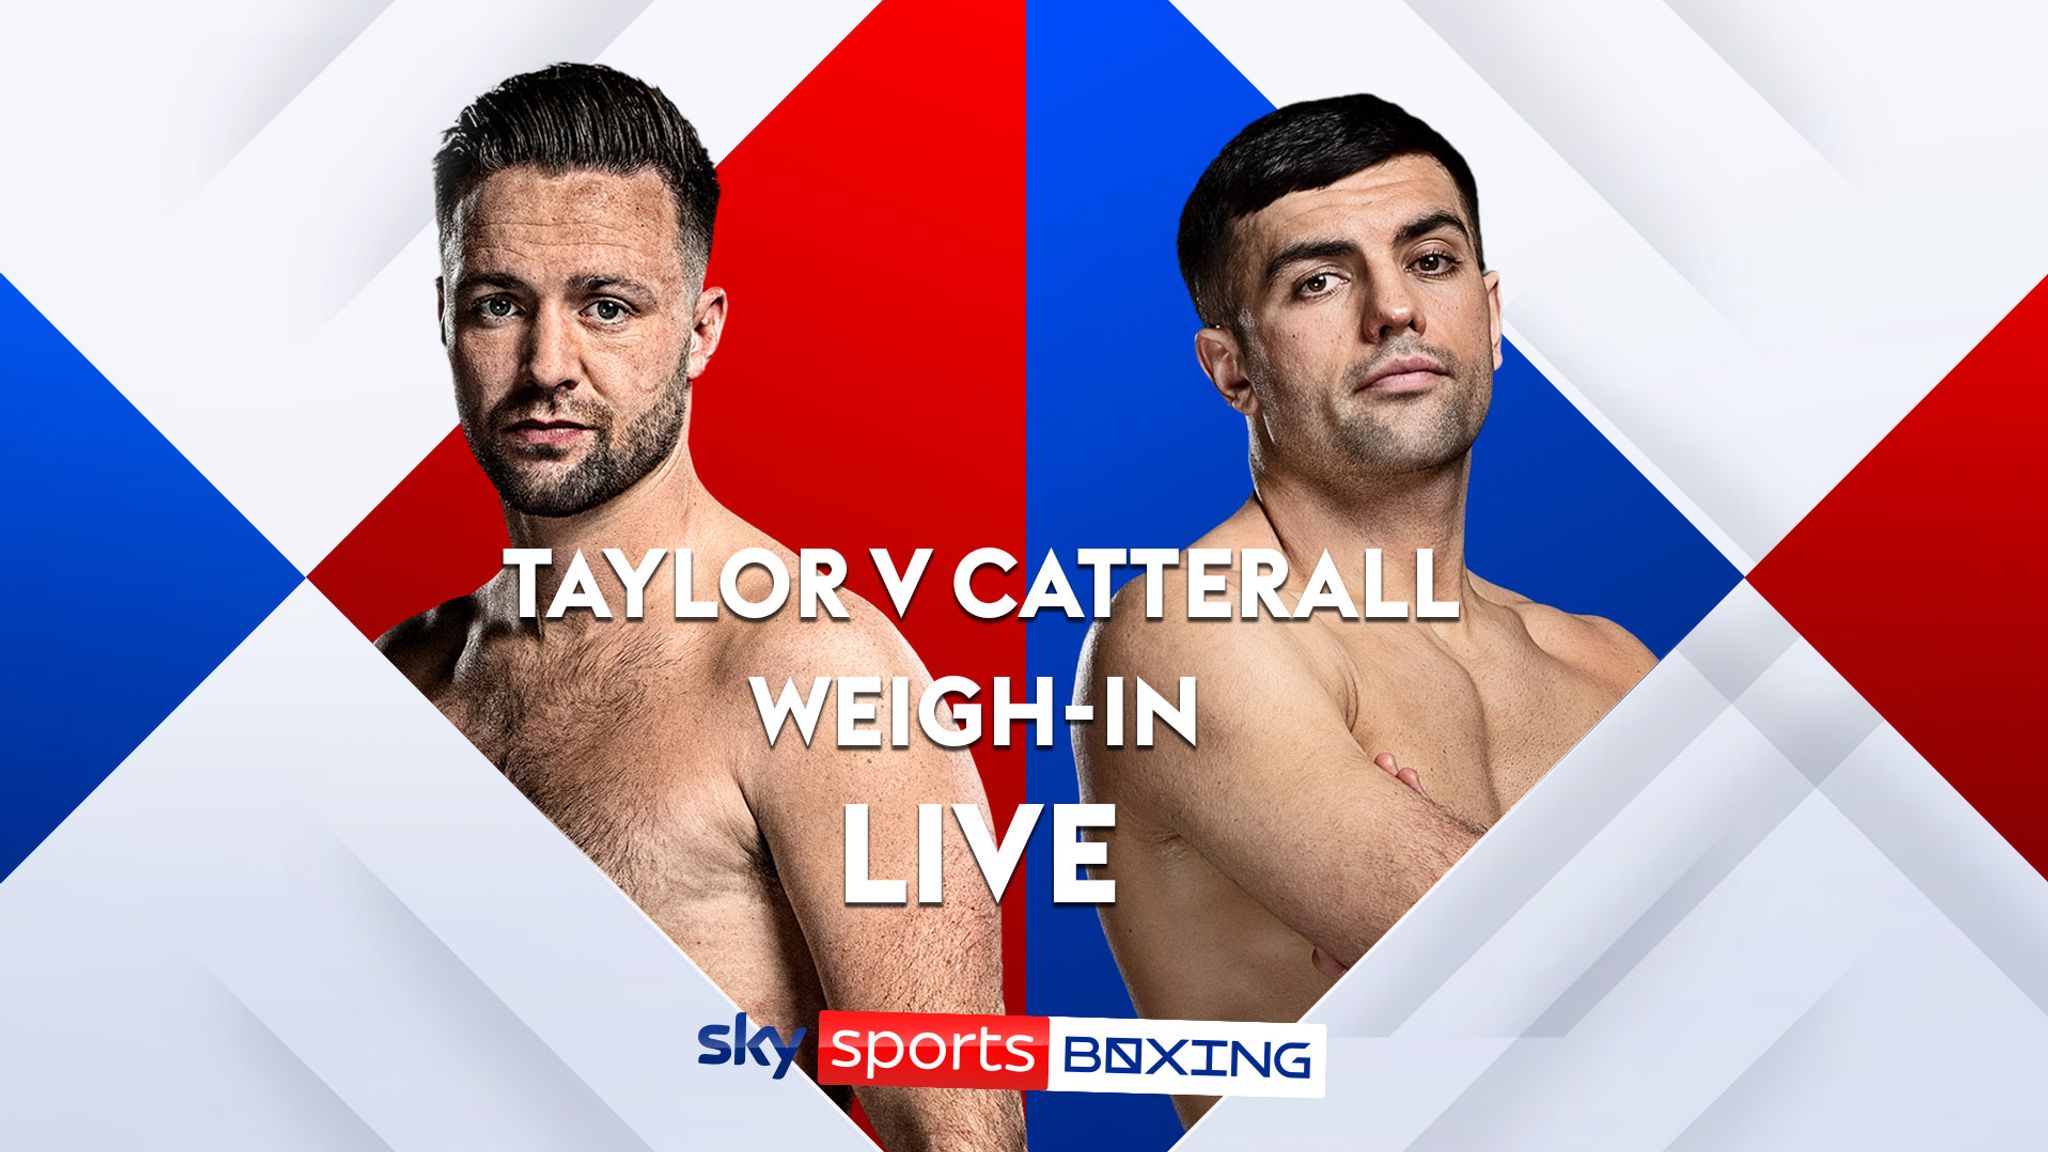 Taylor vs Catterall Live and free stream of weigh-in and face-off before undisputed title fight Boxing News Sky Sports